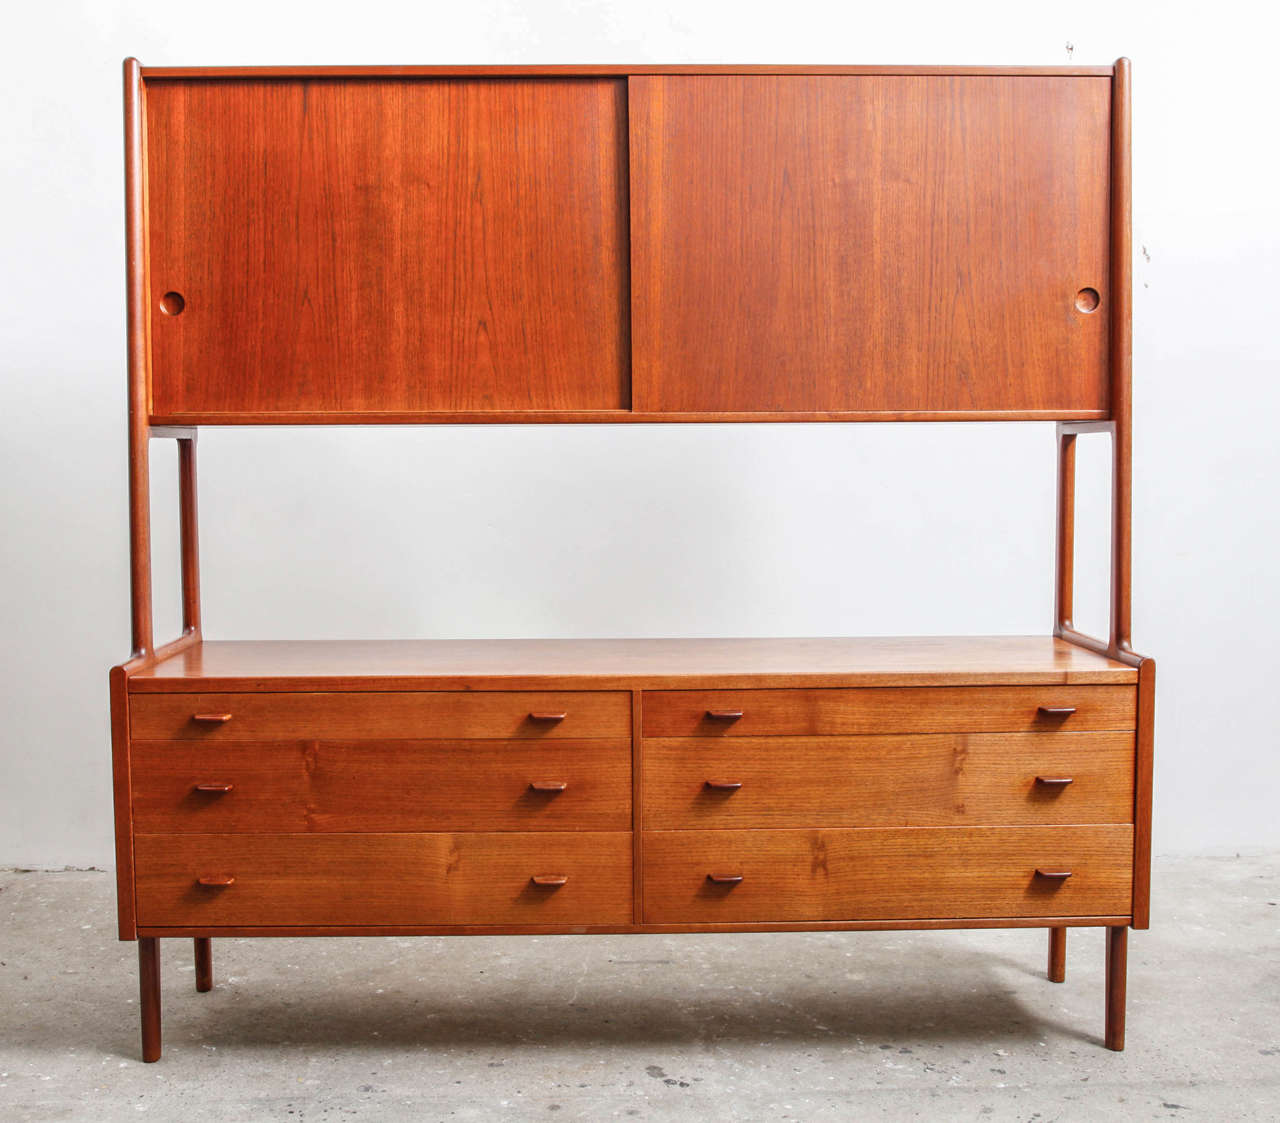 A wonderful example of Hans Wegner's sideboard or buffet combination for Ry Mobler. This piece was Wegner one of his most popular storage solutions.
It is comprised of a bottom sideboard with six drawers and a top buffet with shelves behind two